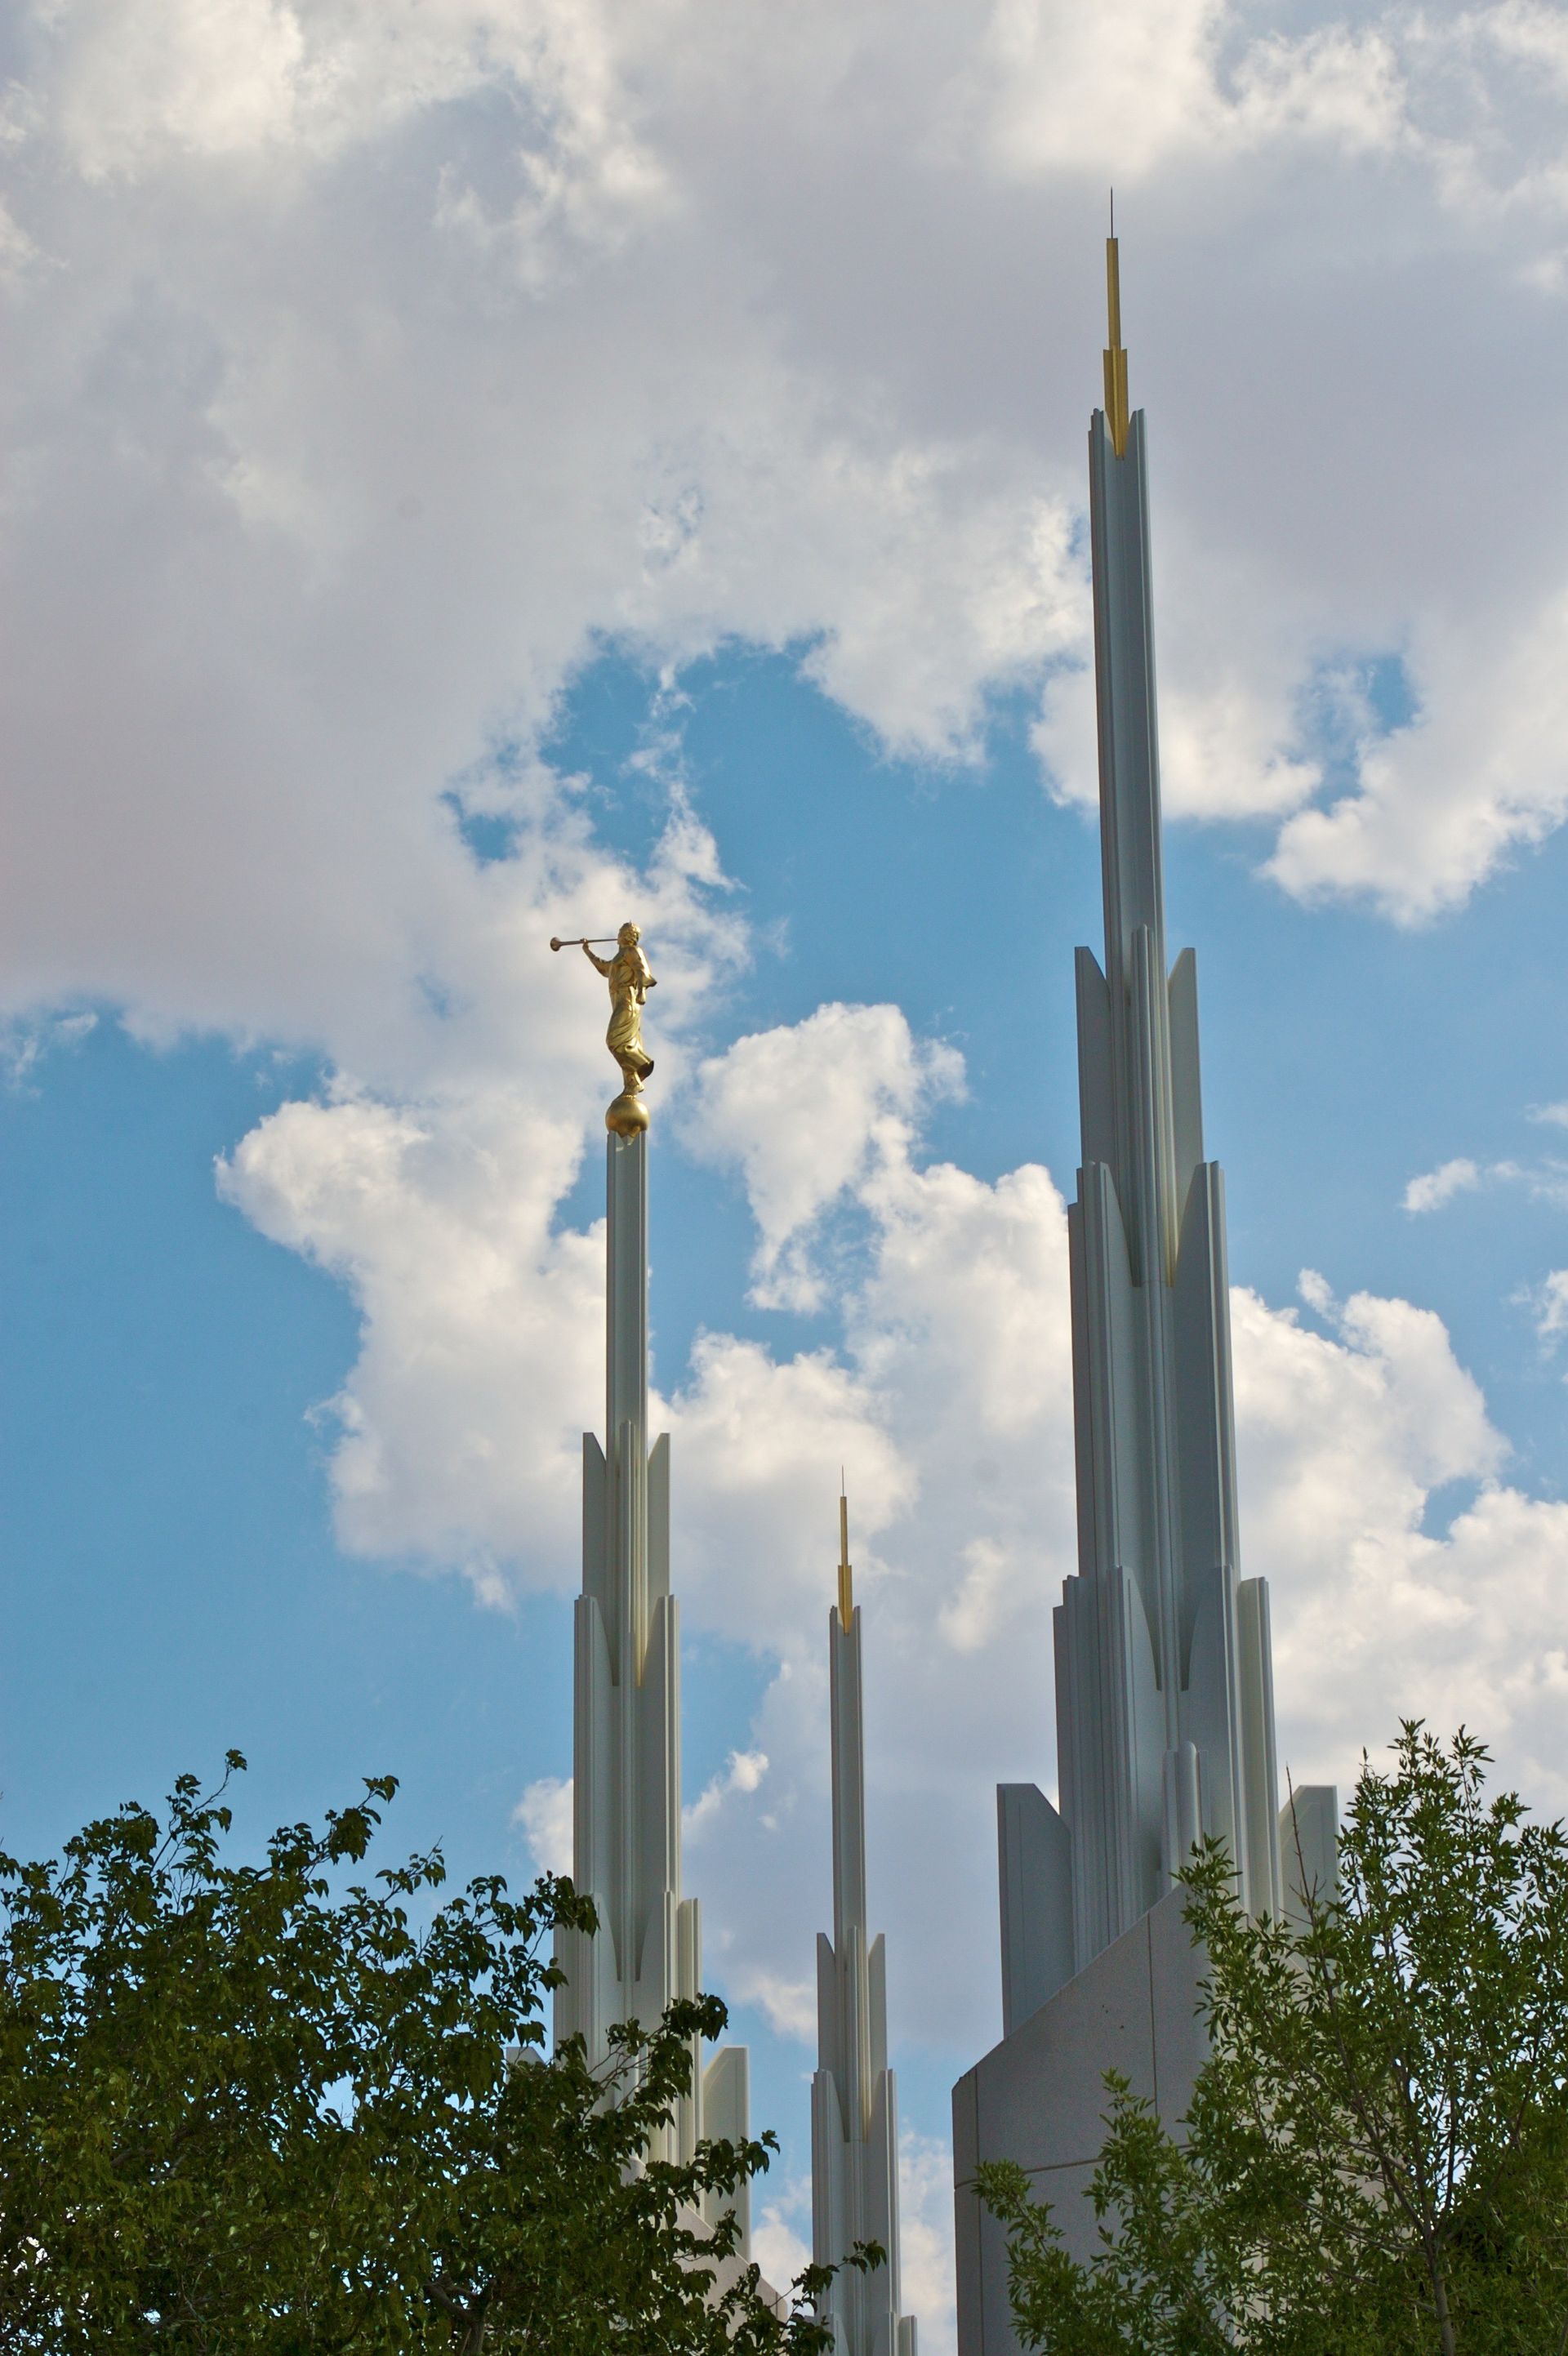 The Las Vegas Nevada Temple spires, including the angel Moroni and scenery.